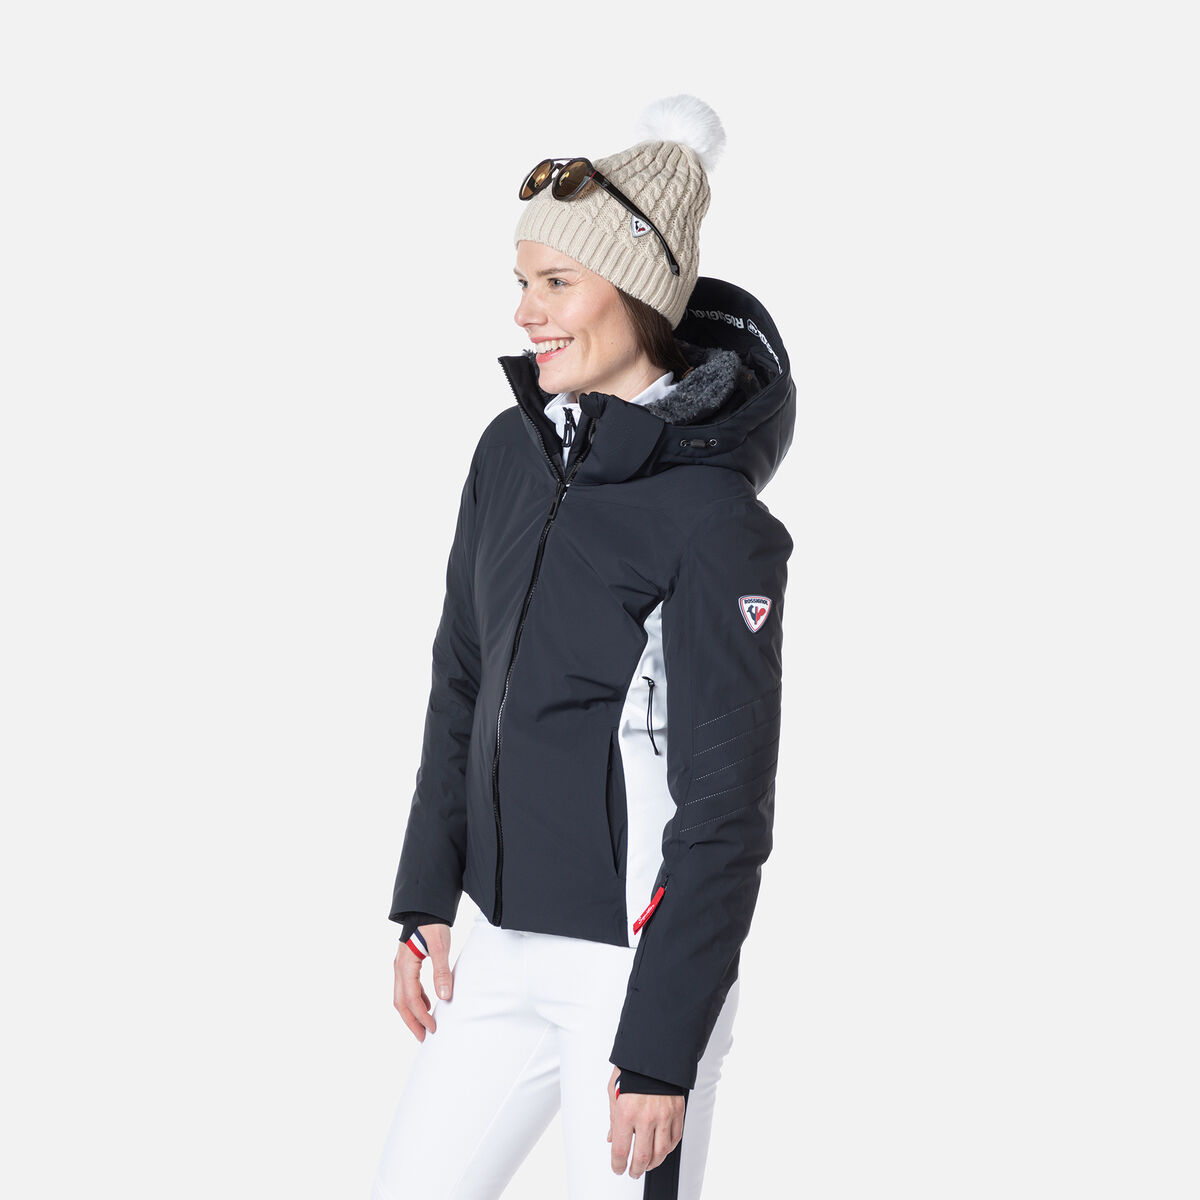 Women's Strato Ski Jacket | Outlet selection | Rossignol